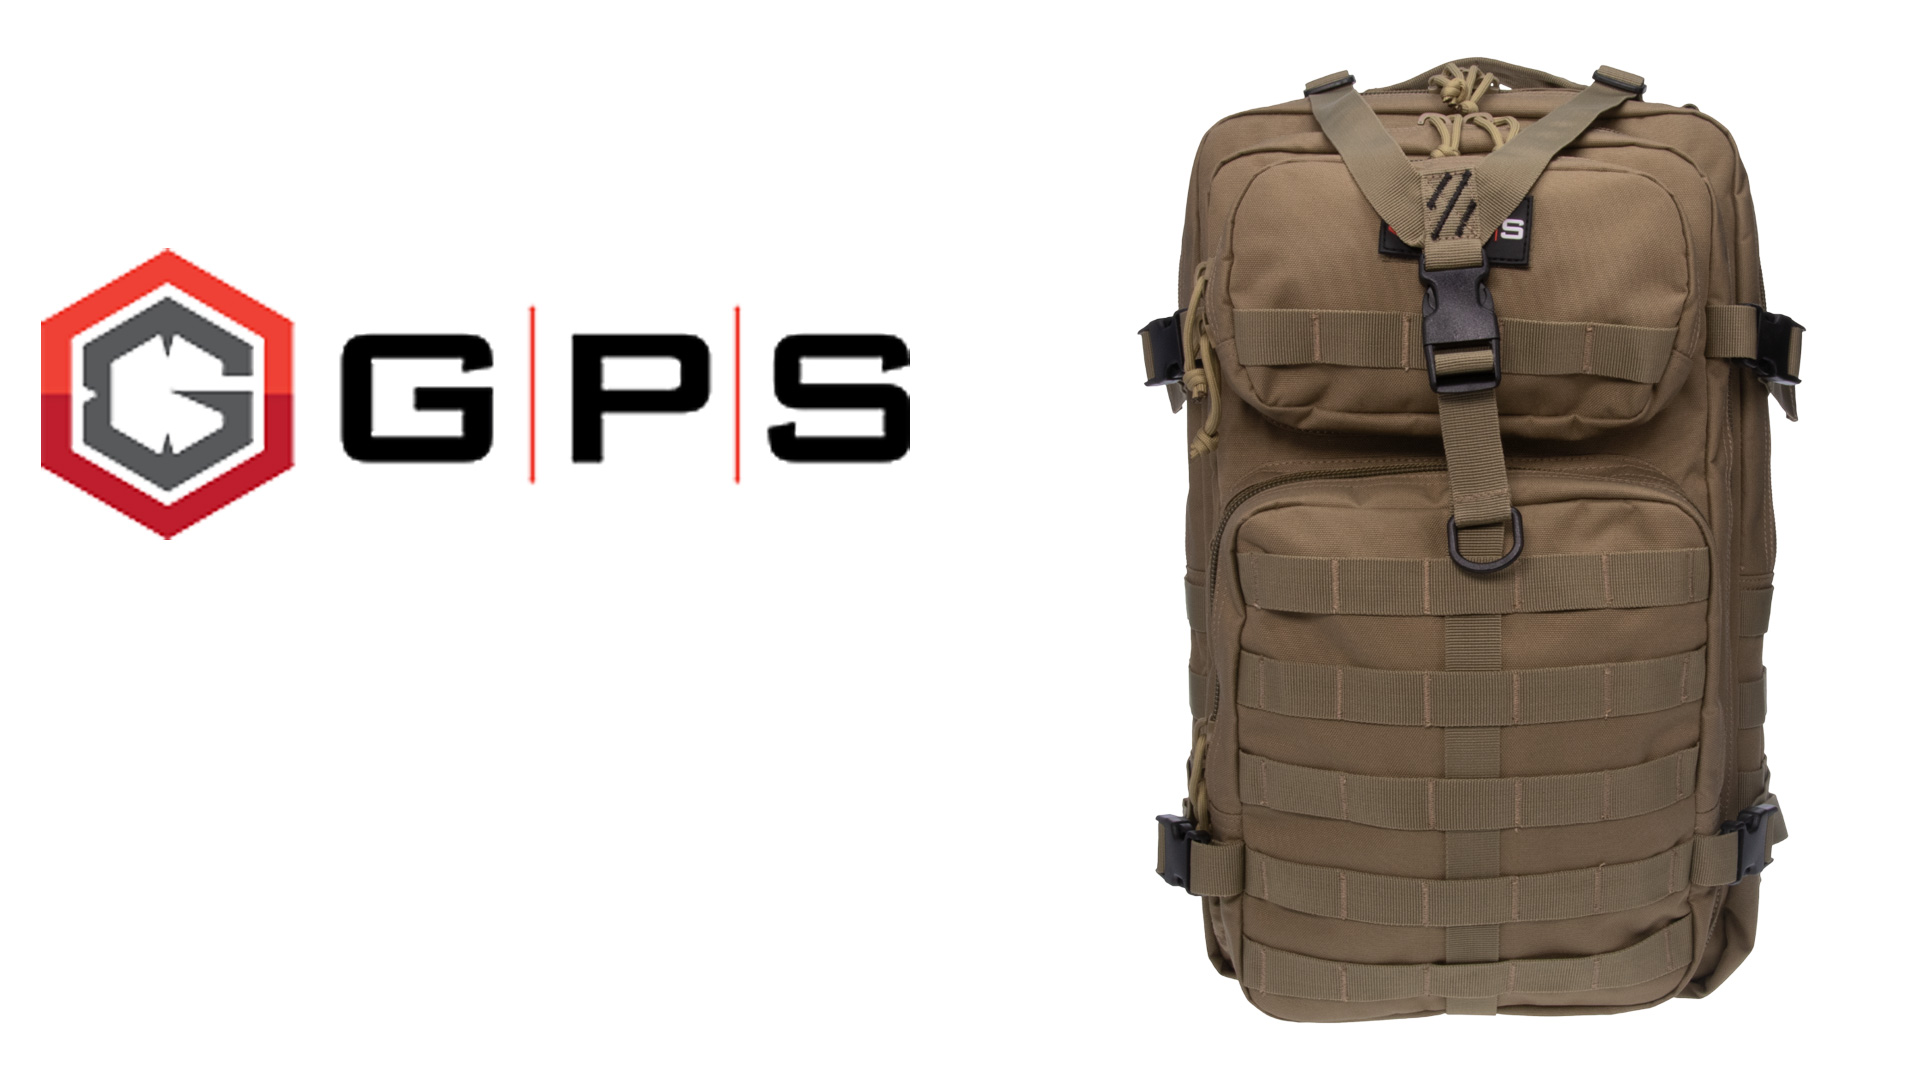 The Best GPS Range Bag for Small to Medium Sized Ranges